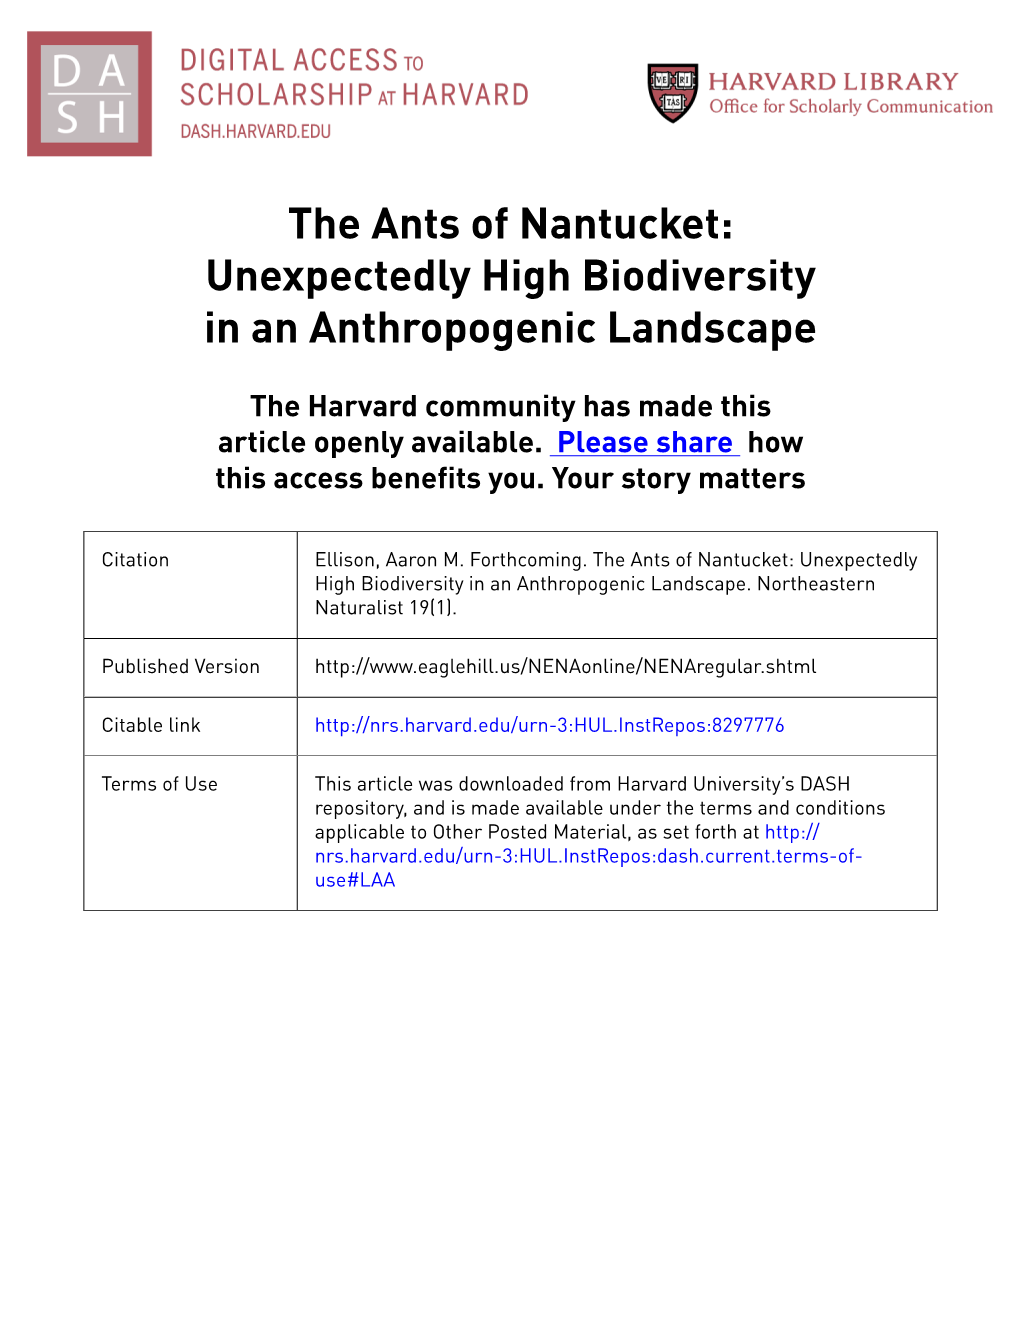 The Ants of Nantucket: Unexpectedly High Biodiversity in an Anthropogenic Landscape